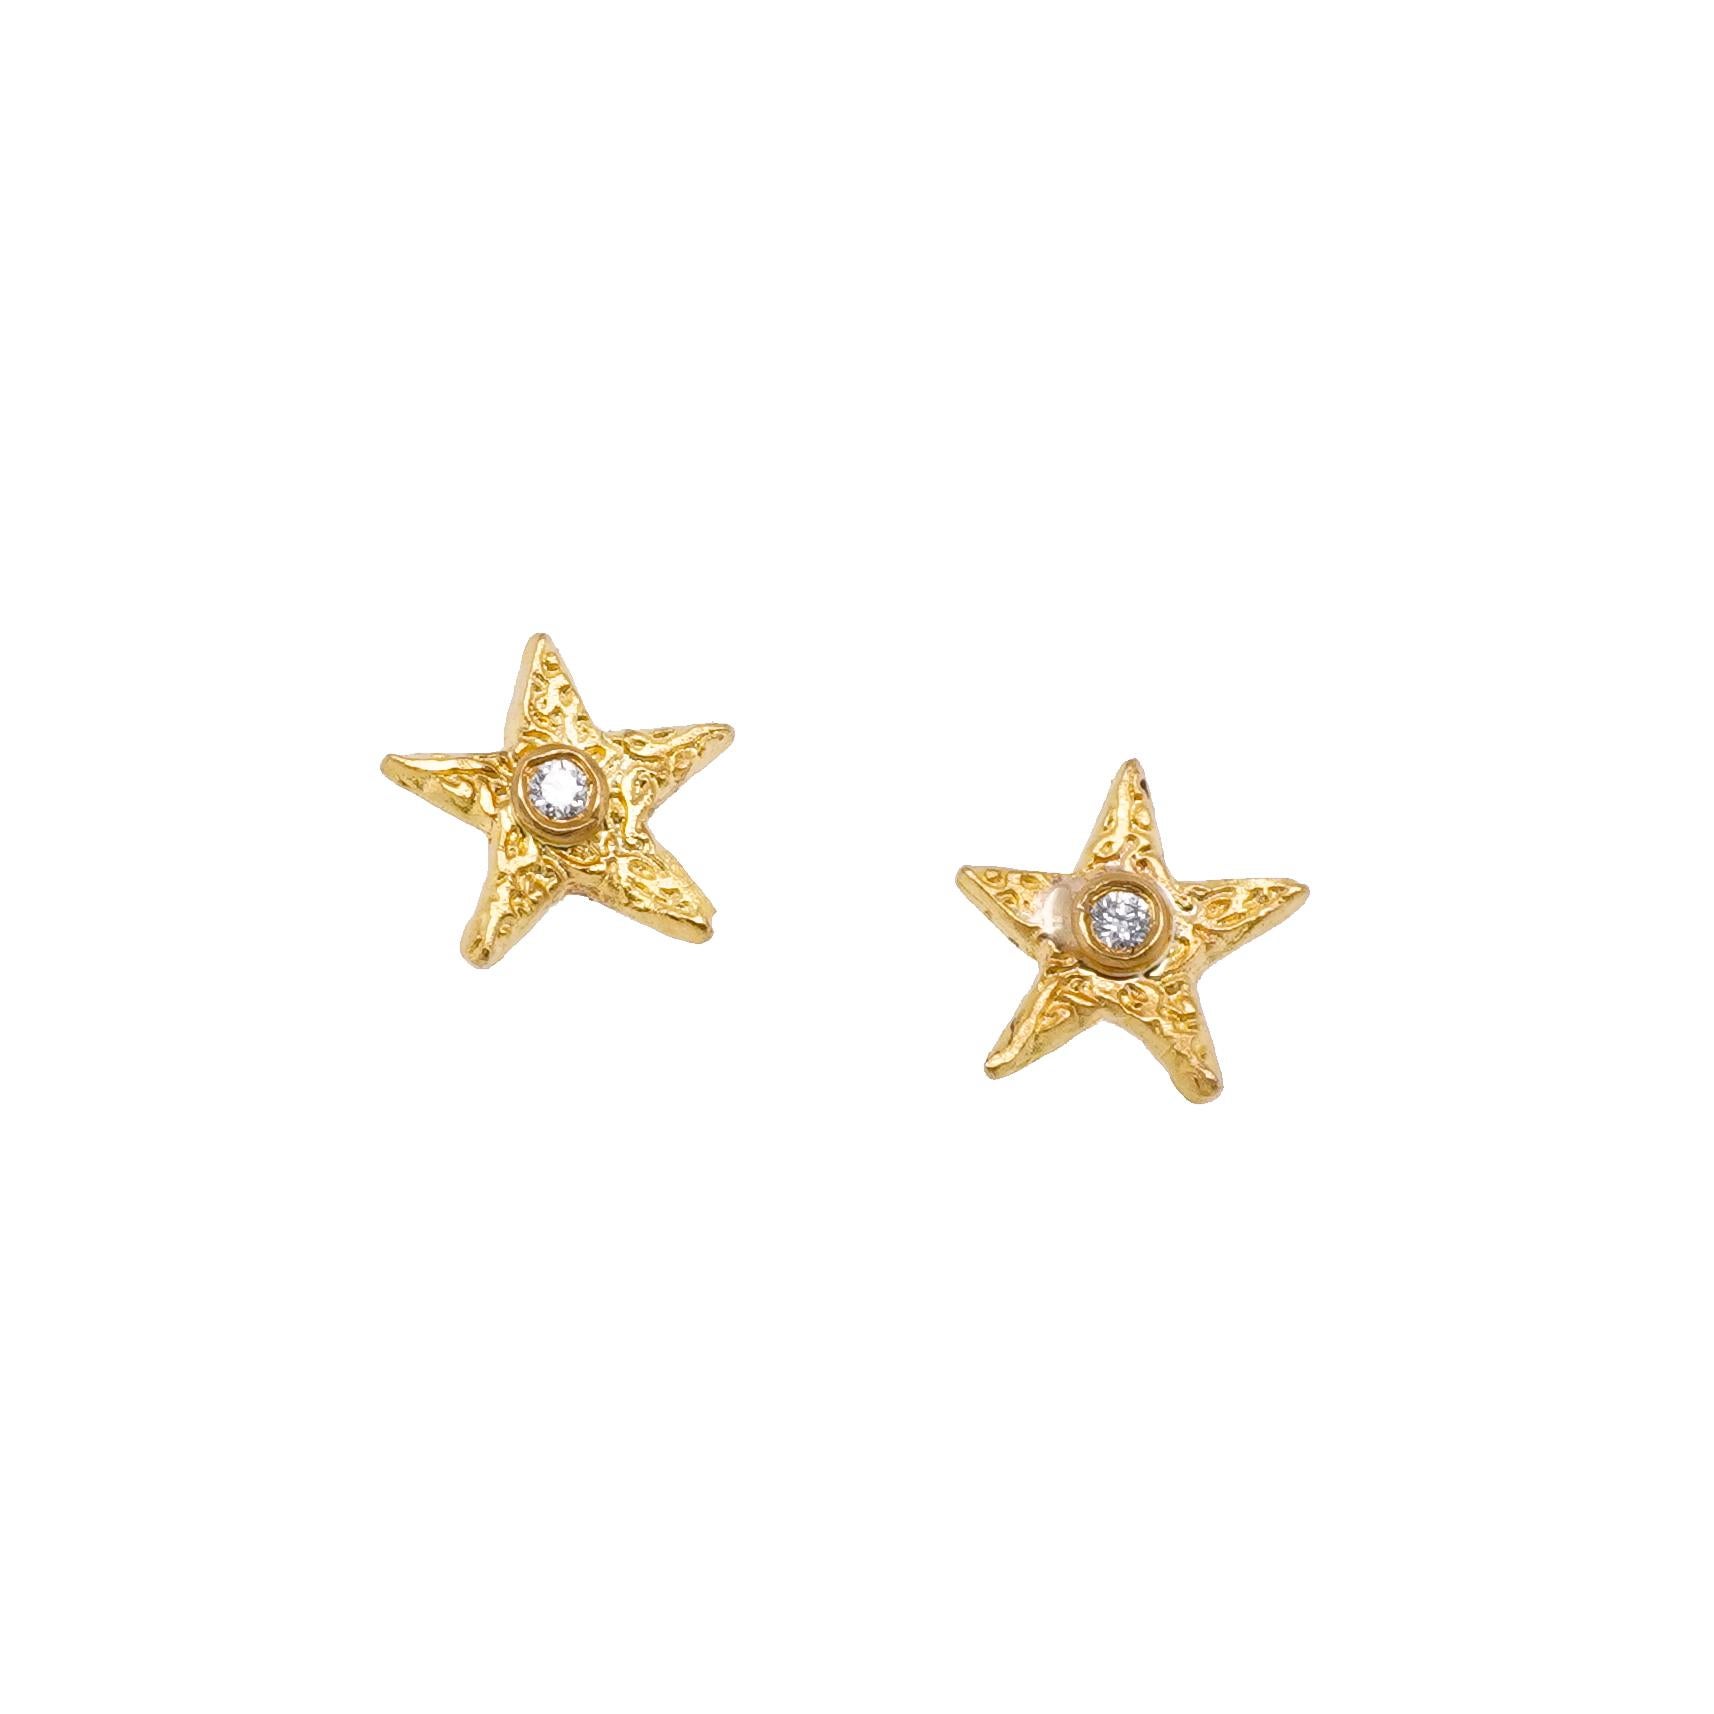 Textured, Star Stud Earrings with Diamonds, in 24kt Gold For Sale 3